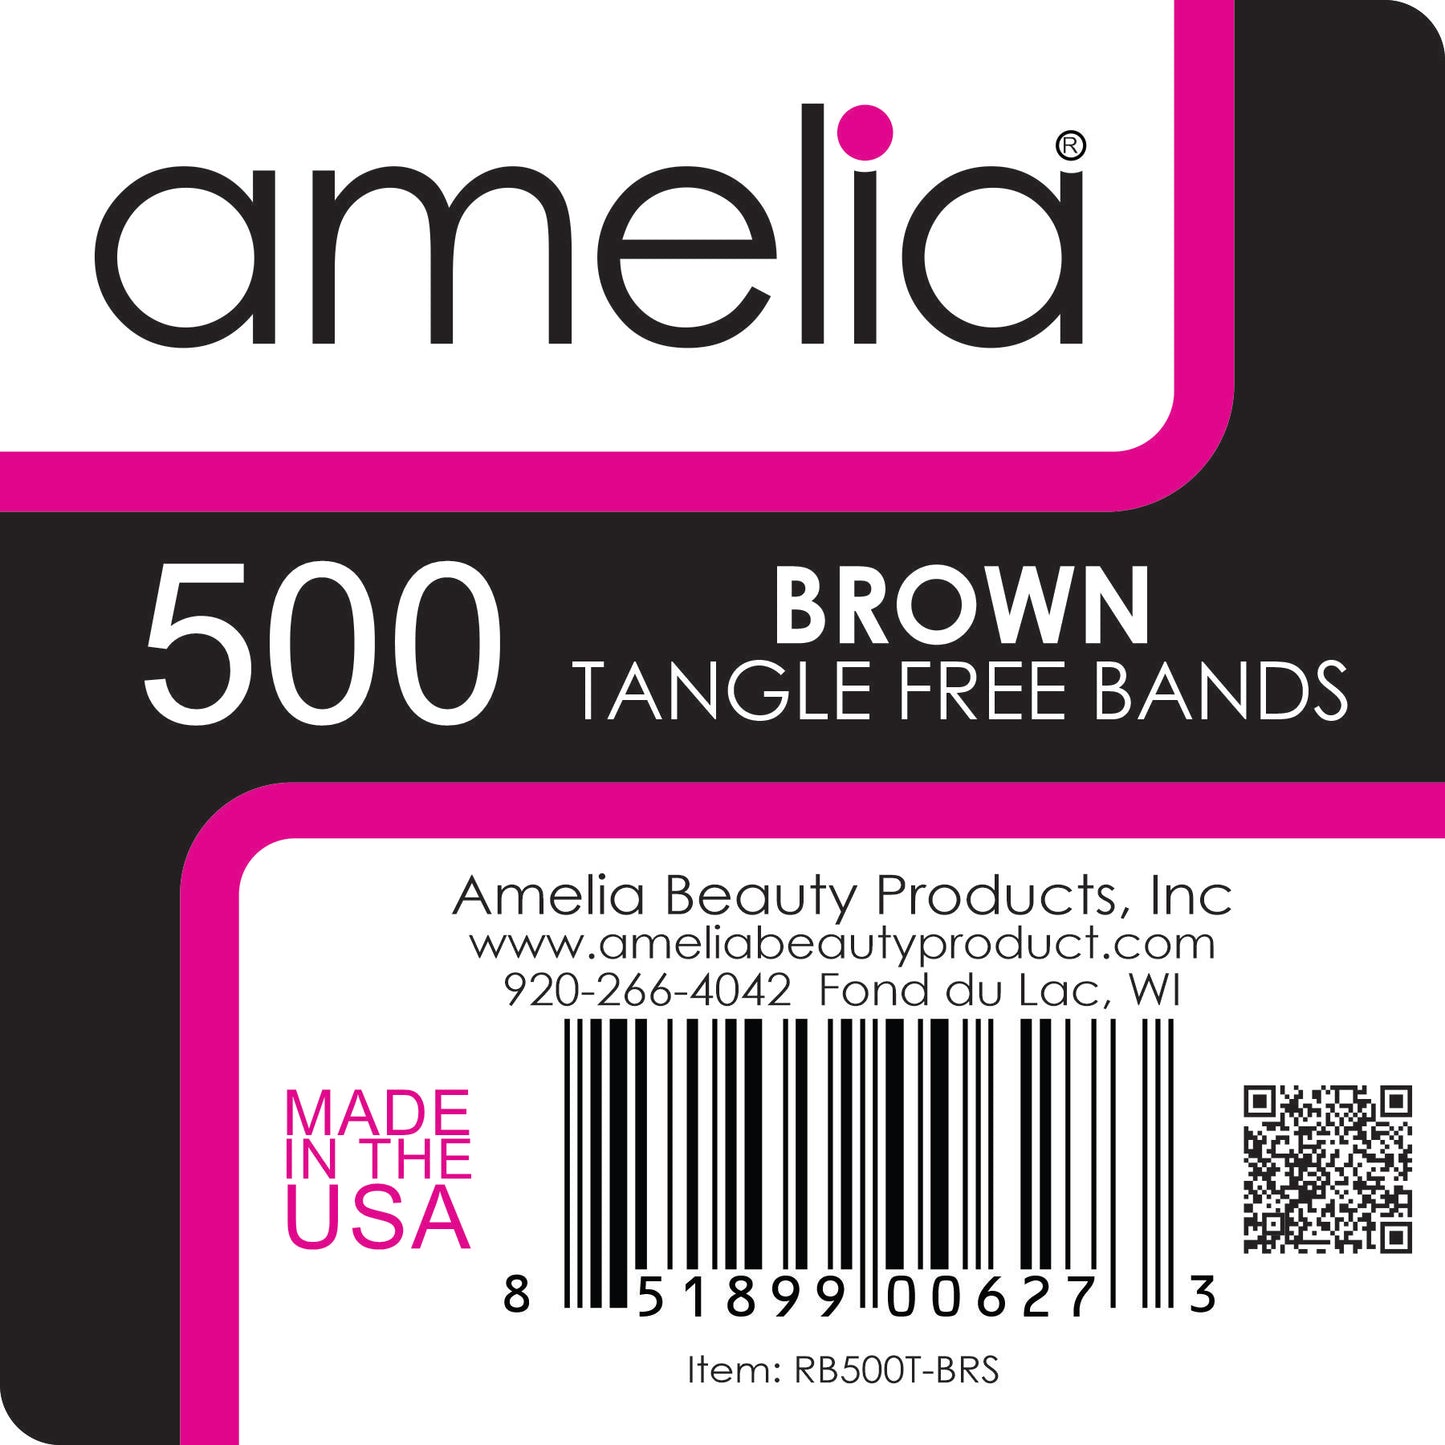 Amelia Beauty | 1/2in, Brown, Tangle Free Elastic Pony Tail Holders | Made in USA, Ideal for Ponytails, Braids, Twists. For Women, Girls. Pain Free, Snag Free, Easy Off | 500 Pack